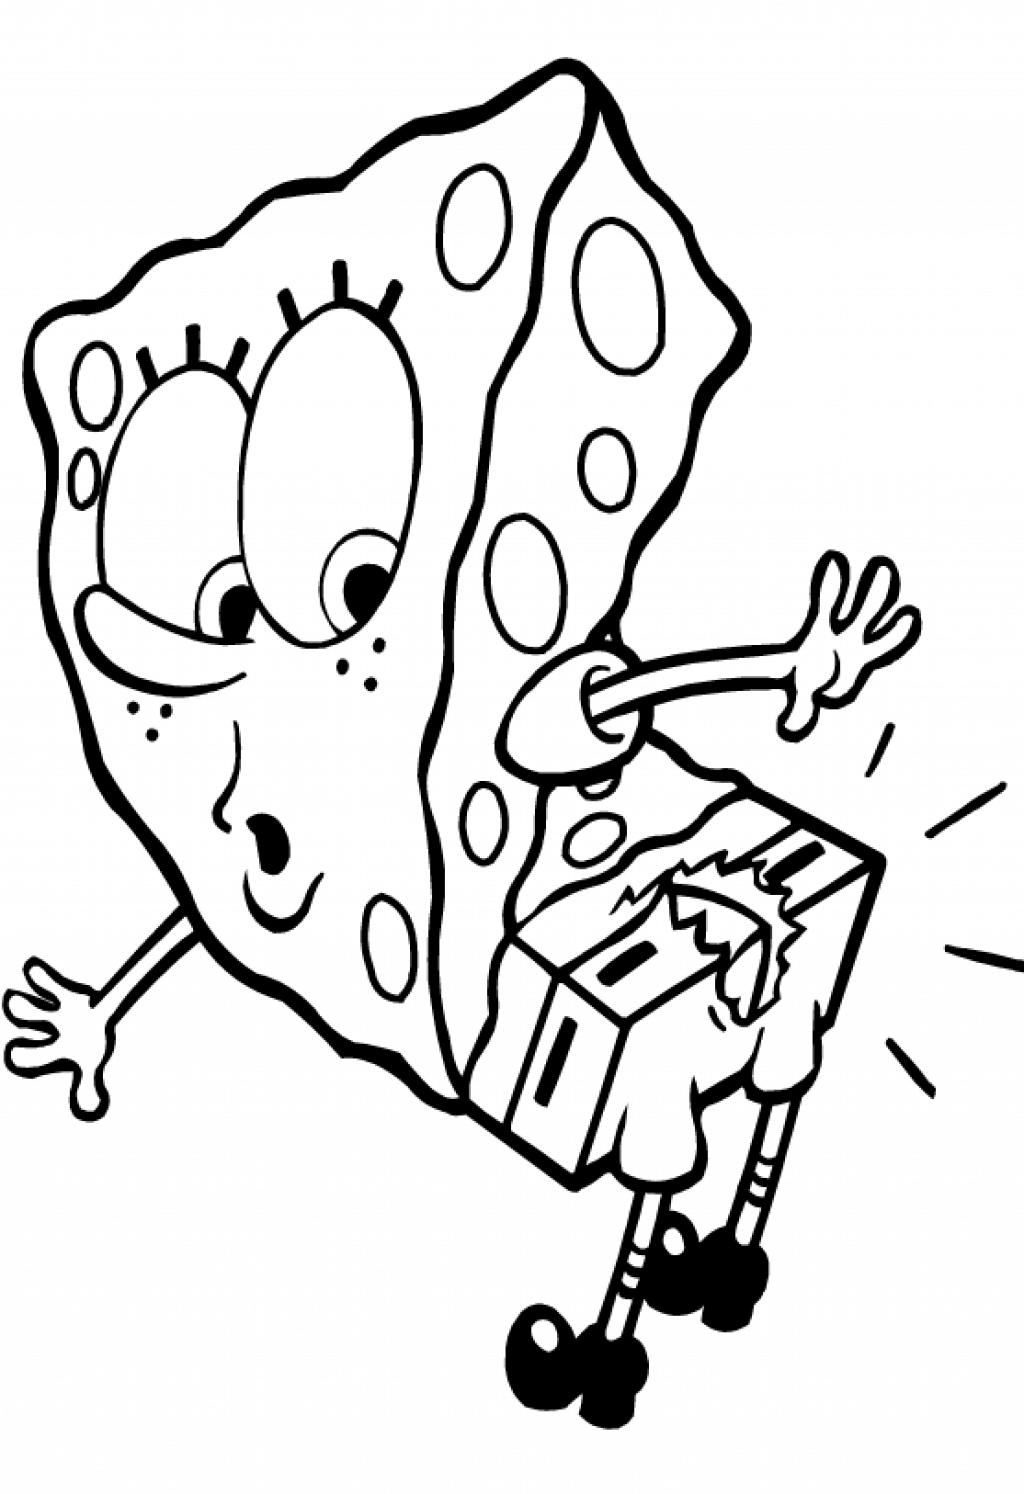 Spongebob Ripped His Pants Coloring Pages